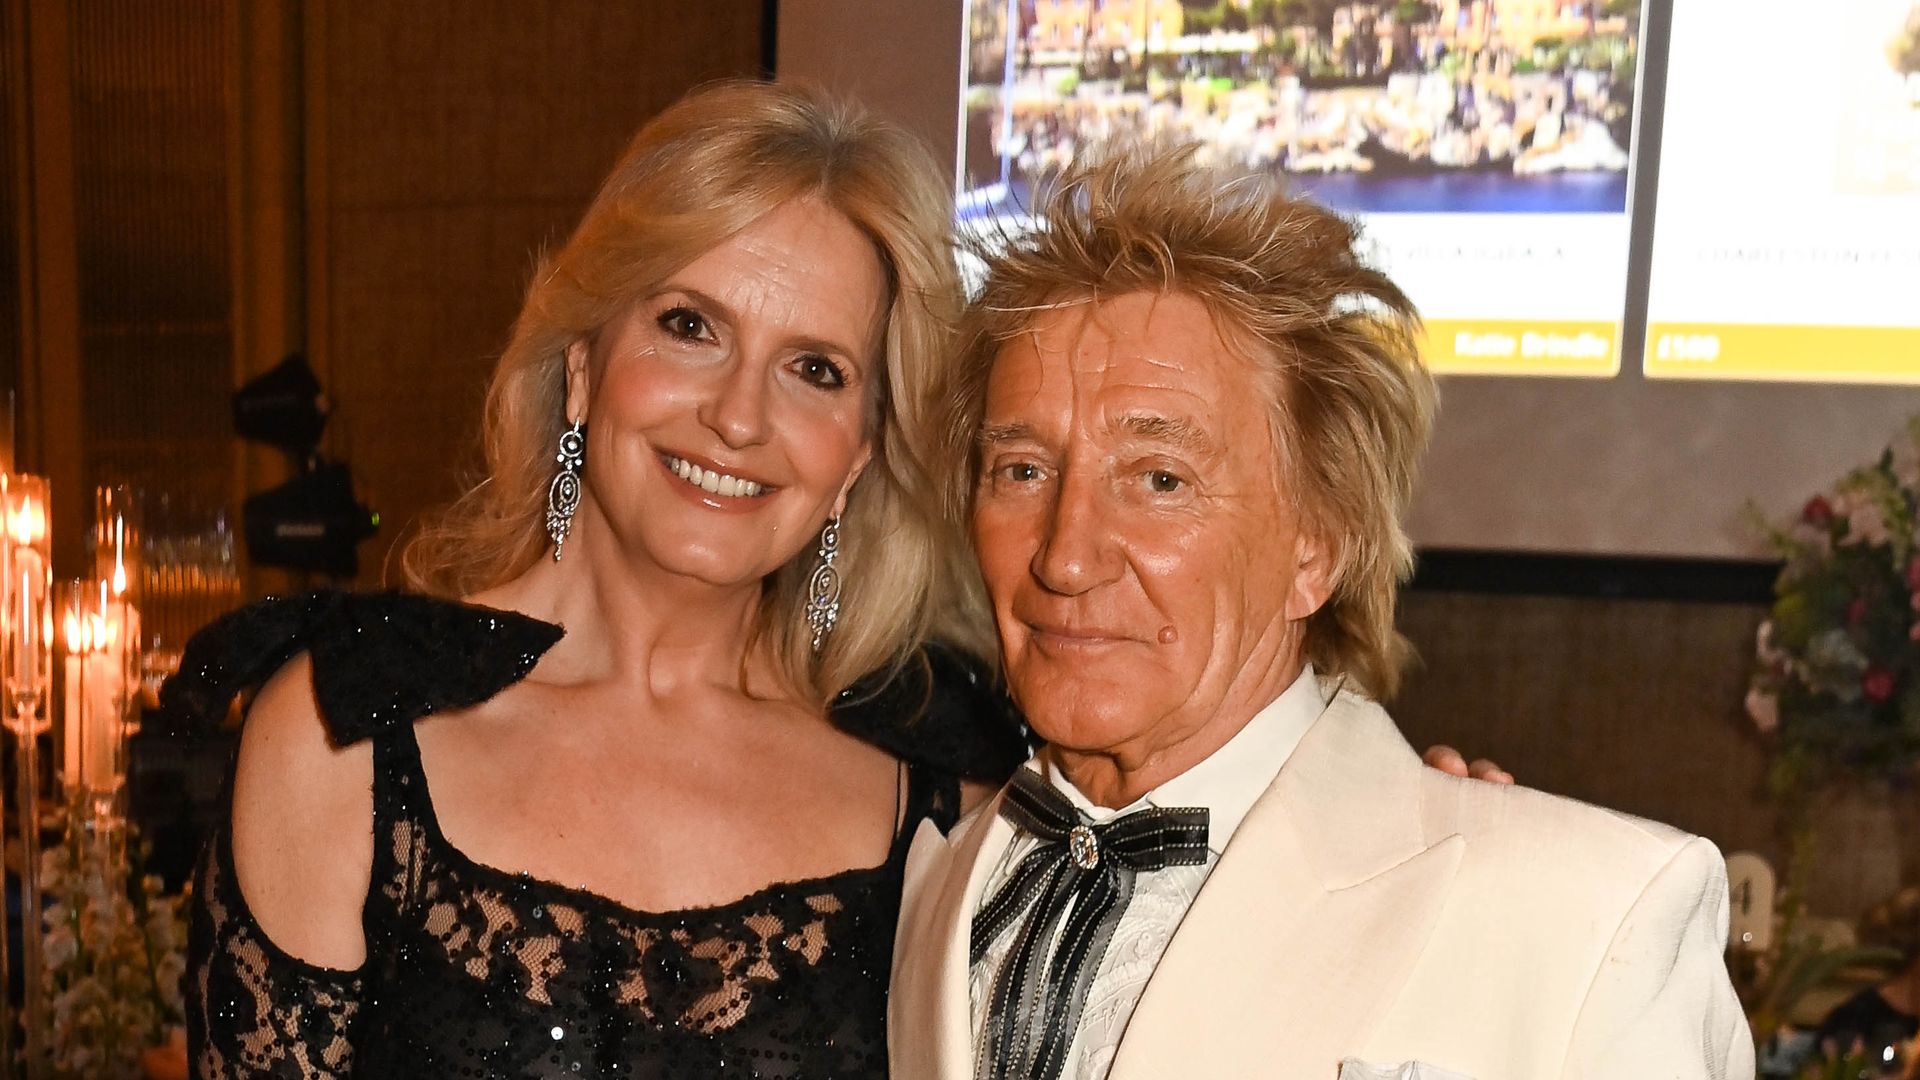 Penny Lancaster surprises in vampy glitterball dress to celebrate with King Charles